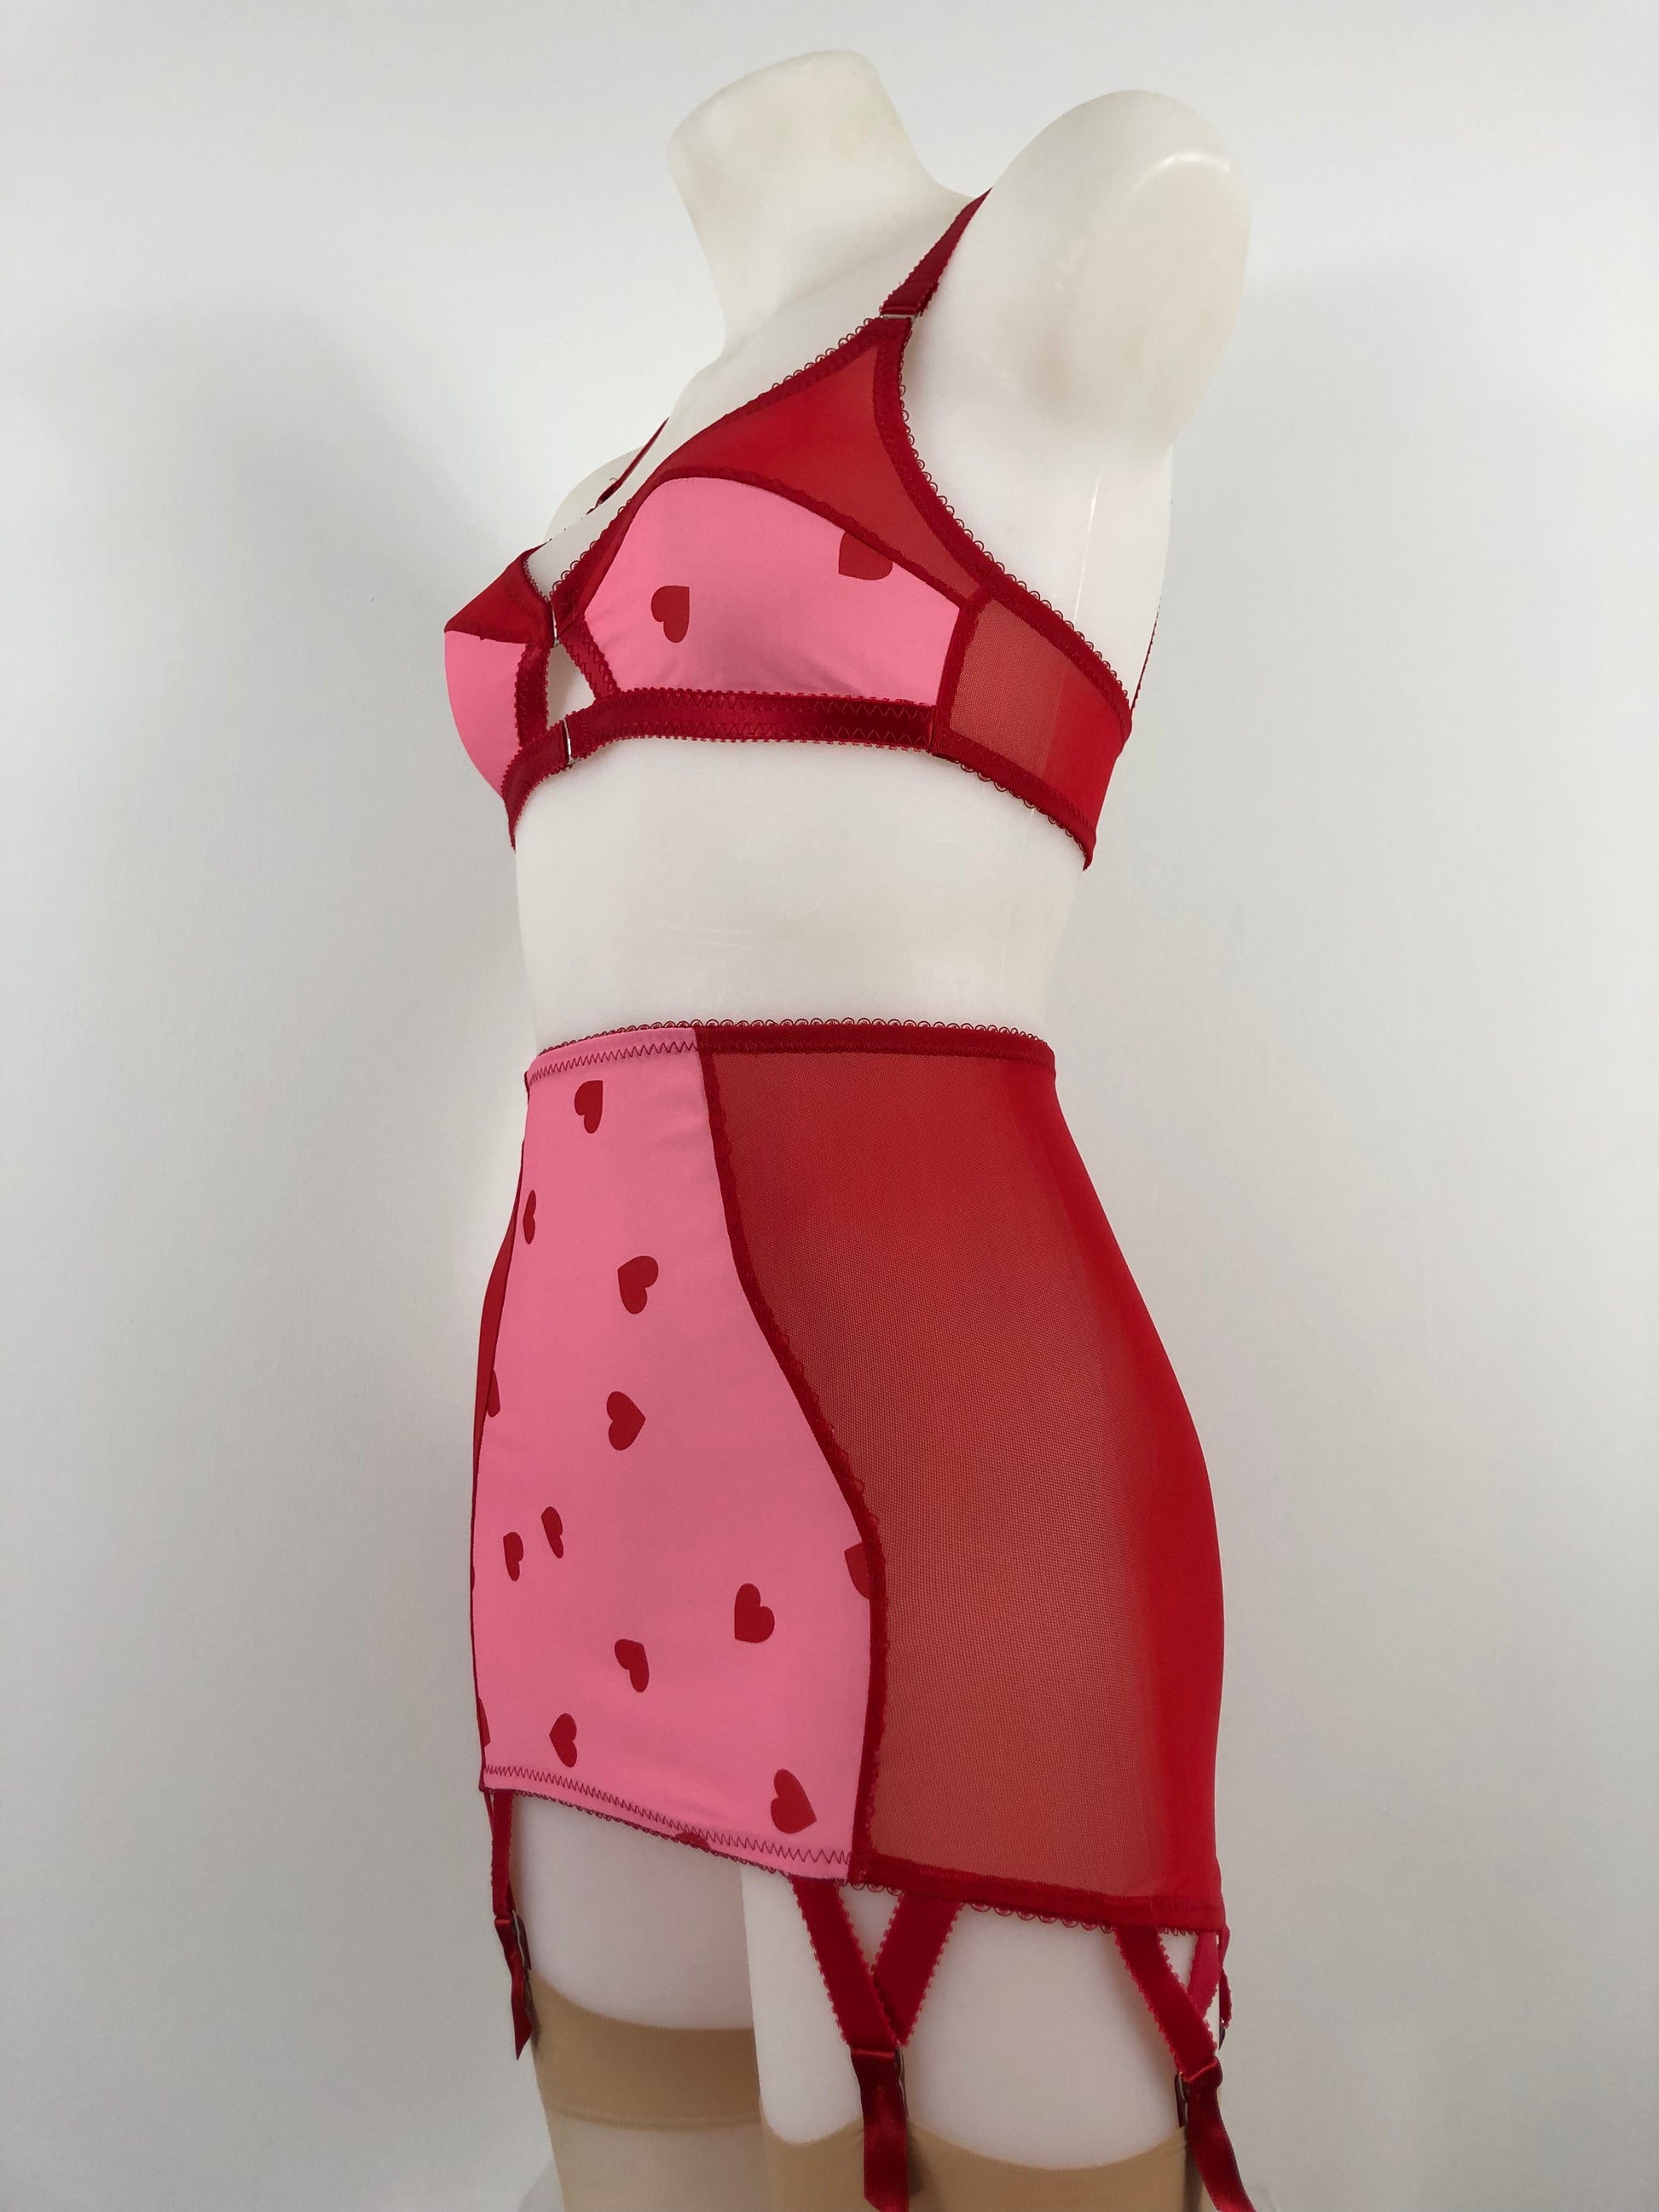 red and pink heart lingerie. vintage inspired longline girdle with pink heart front and red mesh sides, perfect for valentines cheesecake pin ups, six suspender garter clips to hold up seamed stockings. A fun, bold, playful retro inspired underwear set